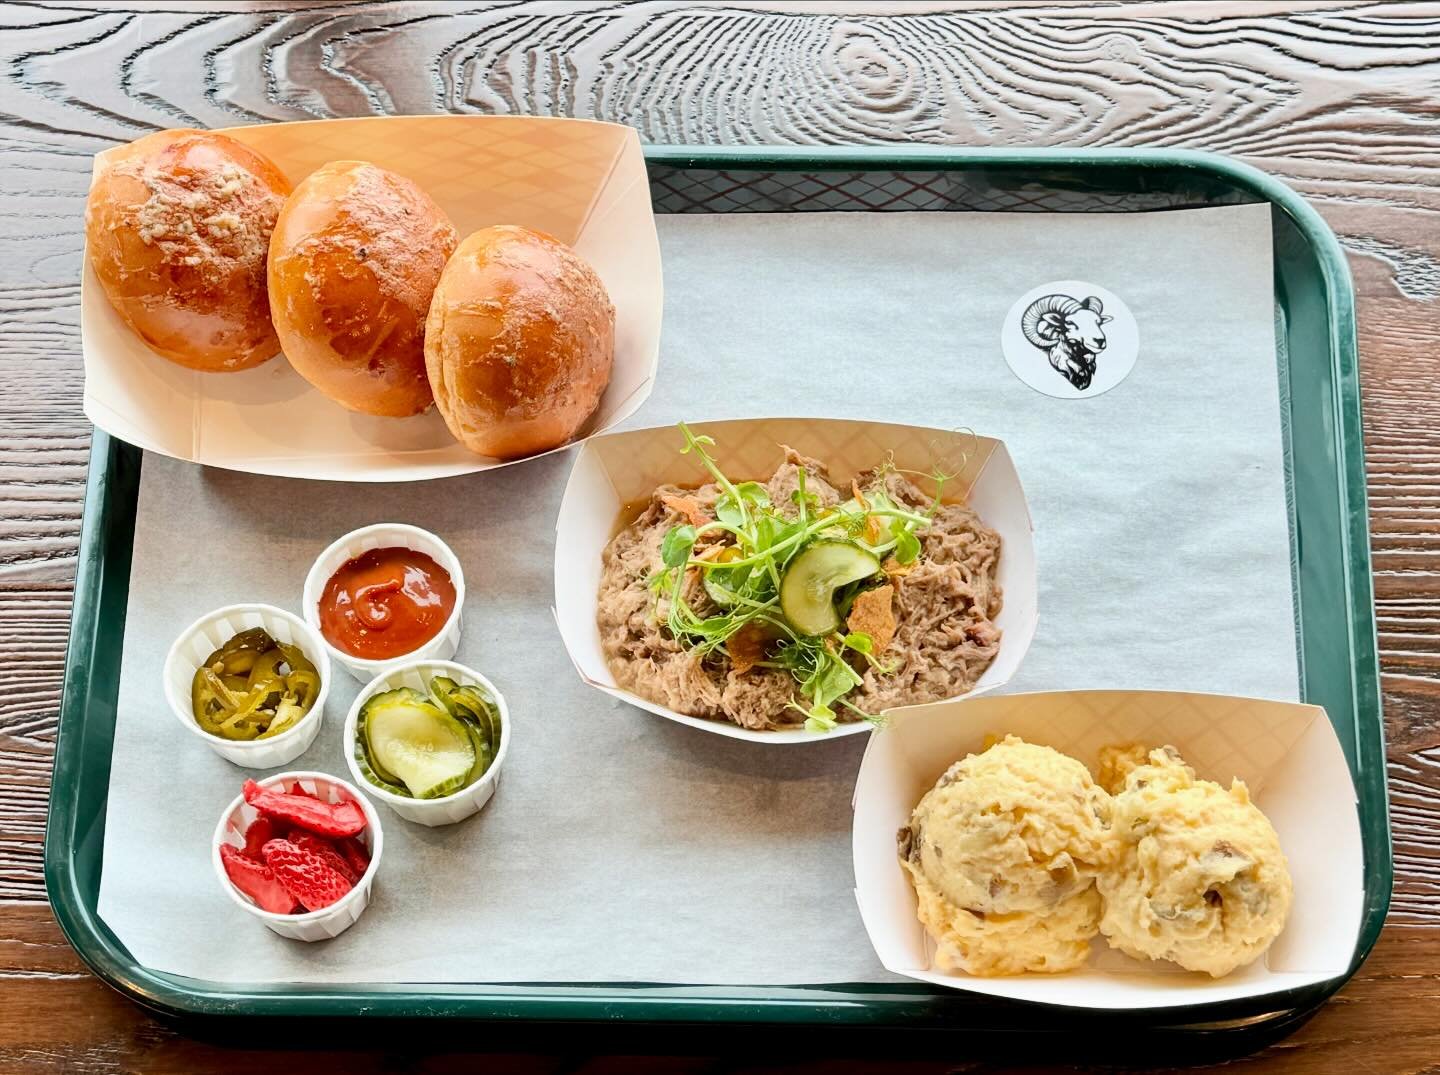 Every Thursday night is BBQ night!  Join us weekly as our chefs prepare classics with a Black Sheep twist. 

Tonight is pulled pork shoulder, homemade strawberry BBQ sauce, brioche sliders, potato salad and a trio of house pickles. 

#njeats #foodie 